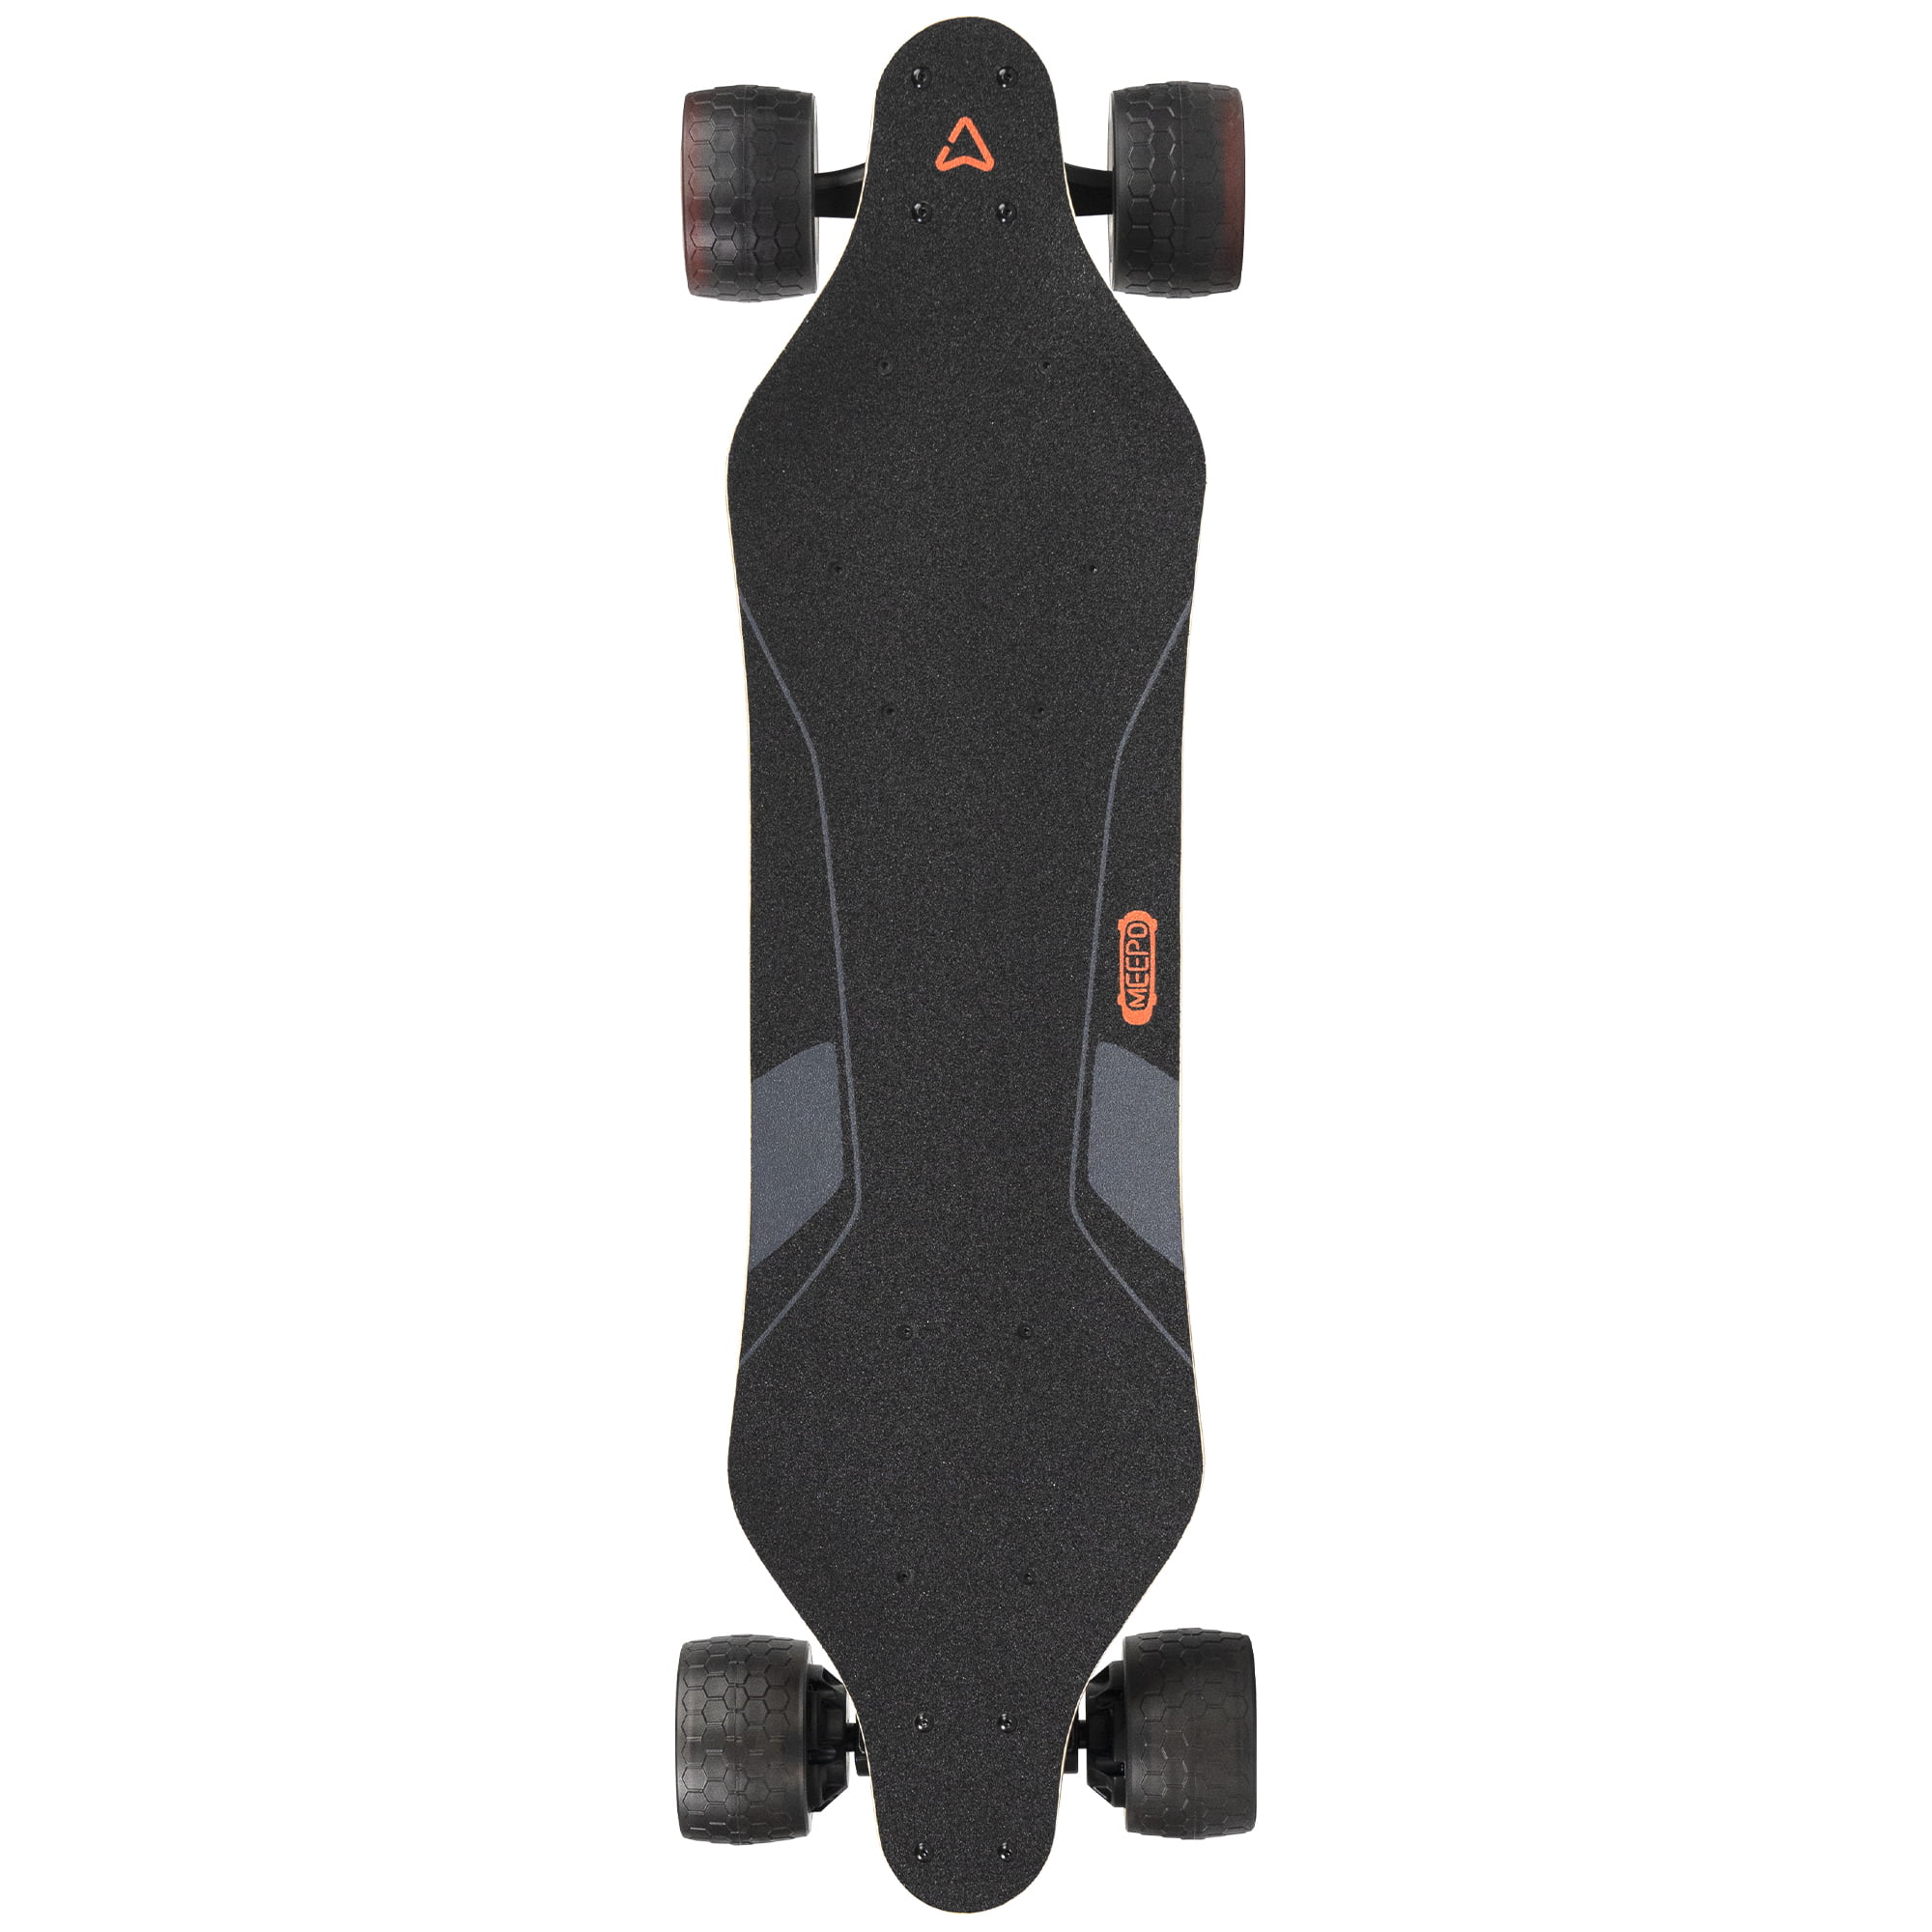 Meepo Electric Skateboards (@meepoboard) • Instagram photos and videos